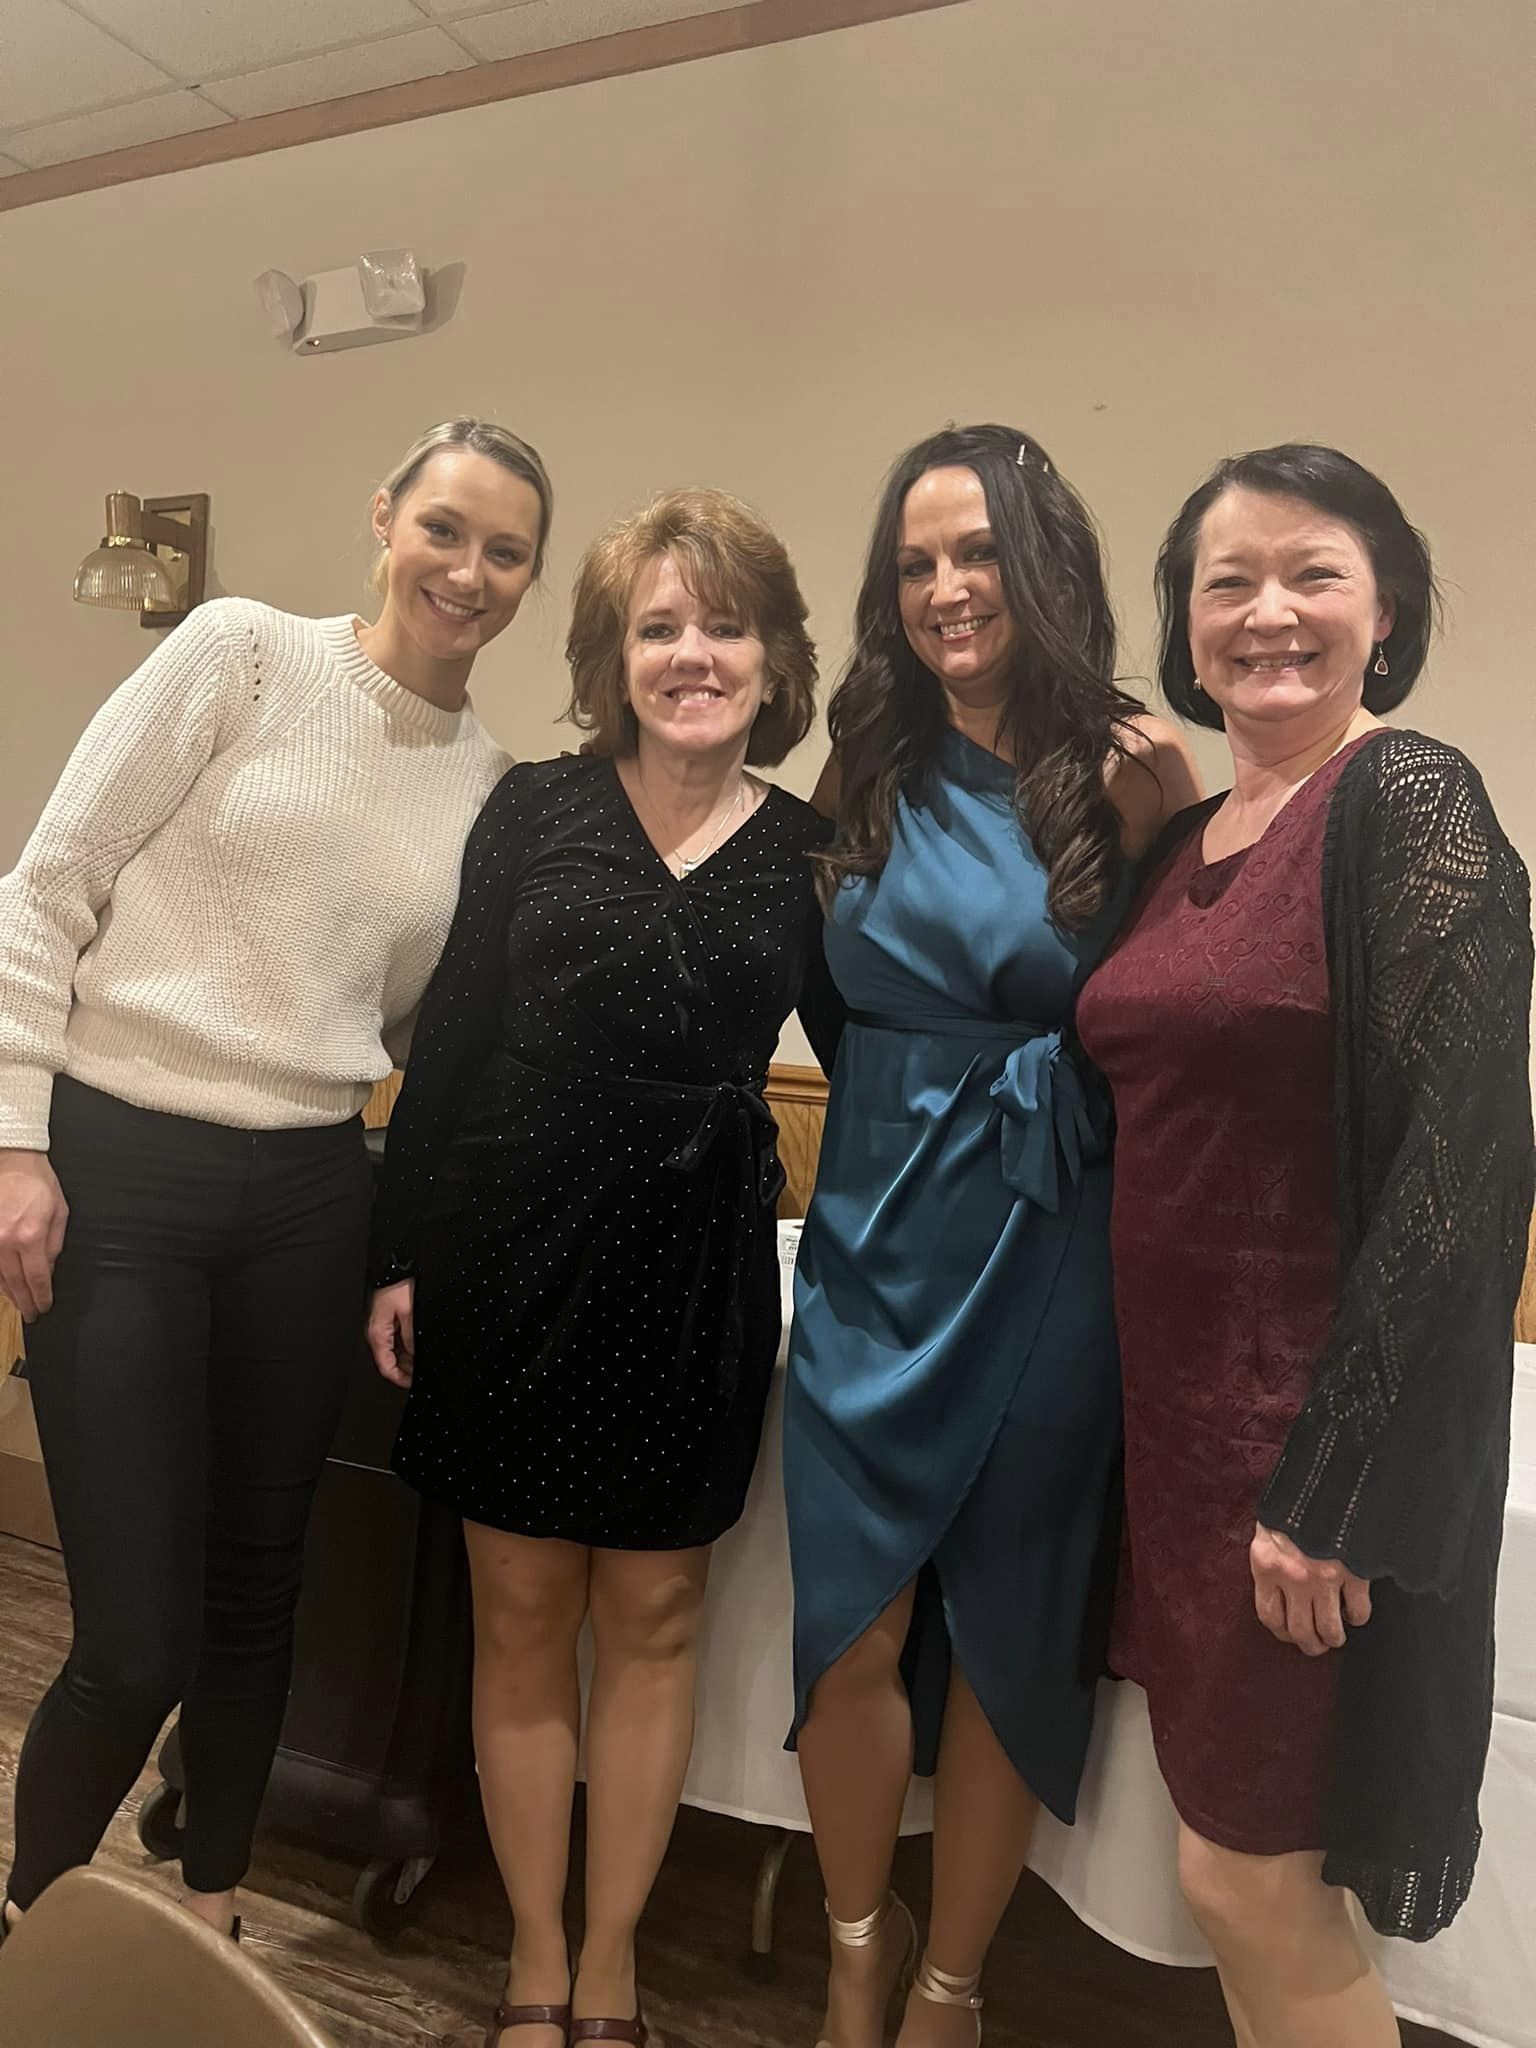 Weichert Place Perfect Realty L to R: Tillie Hayes, Dawn Hayes, Amy Bretl, Rita Waitz